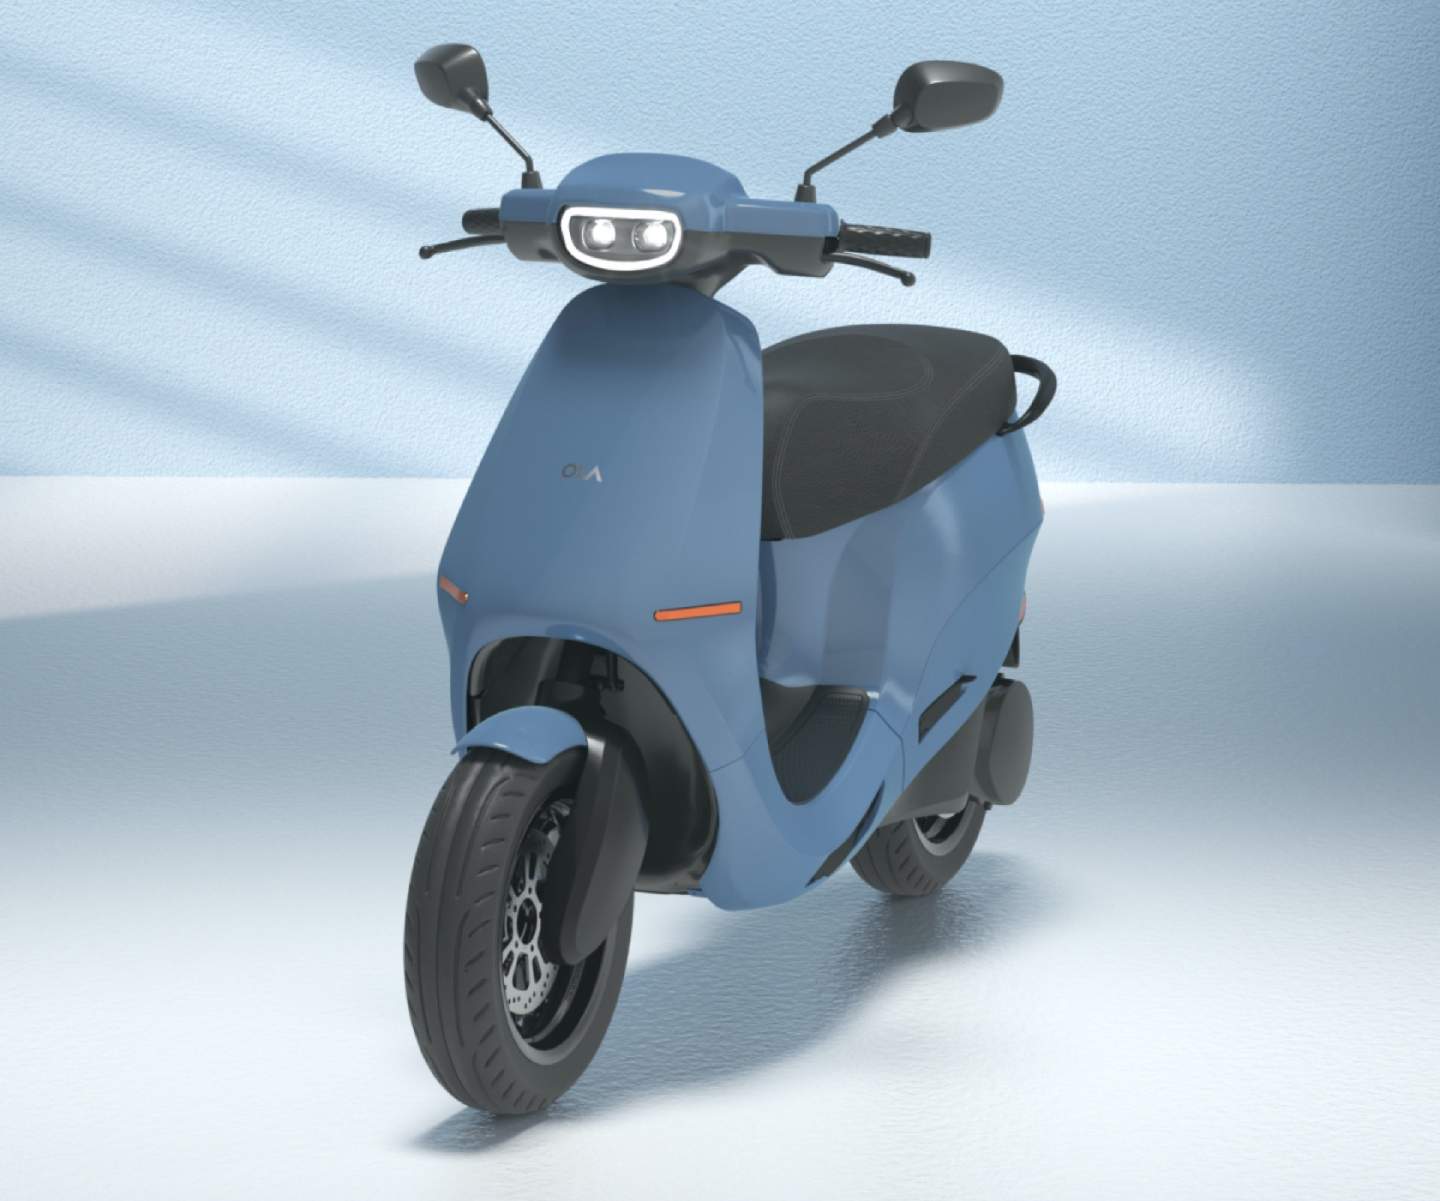 This Ola S1 electric scooter could be a two-wheeled game-changer - SlashGear